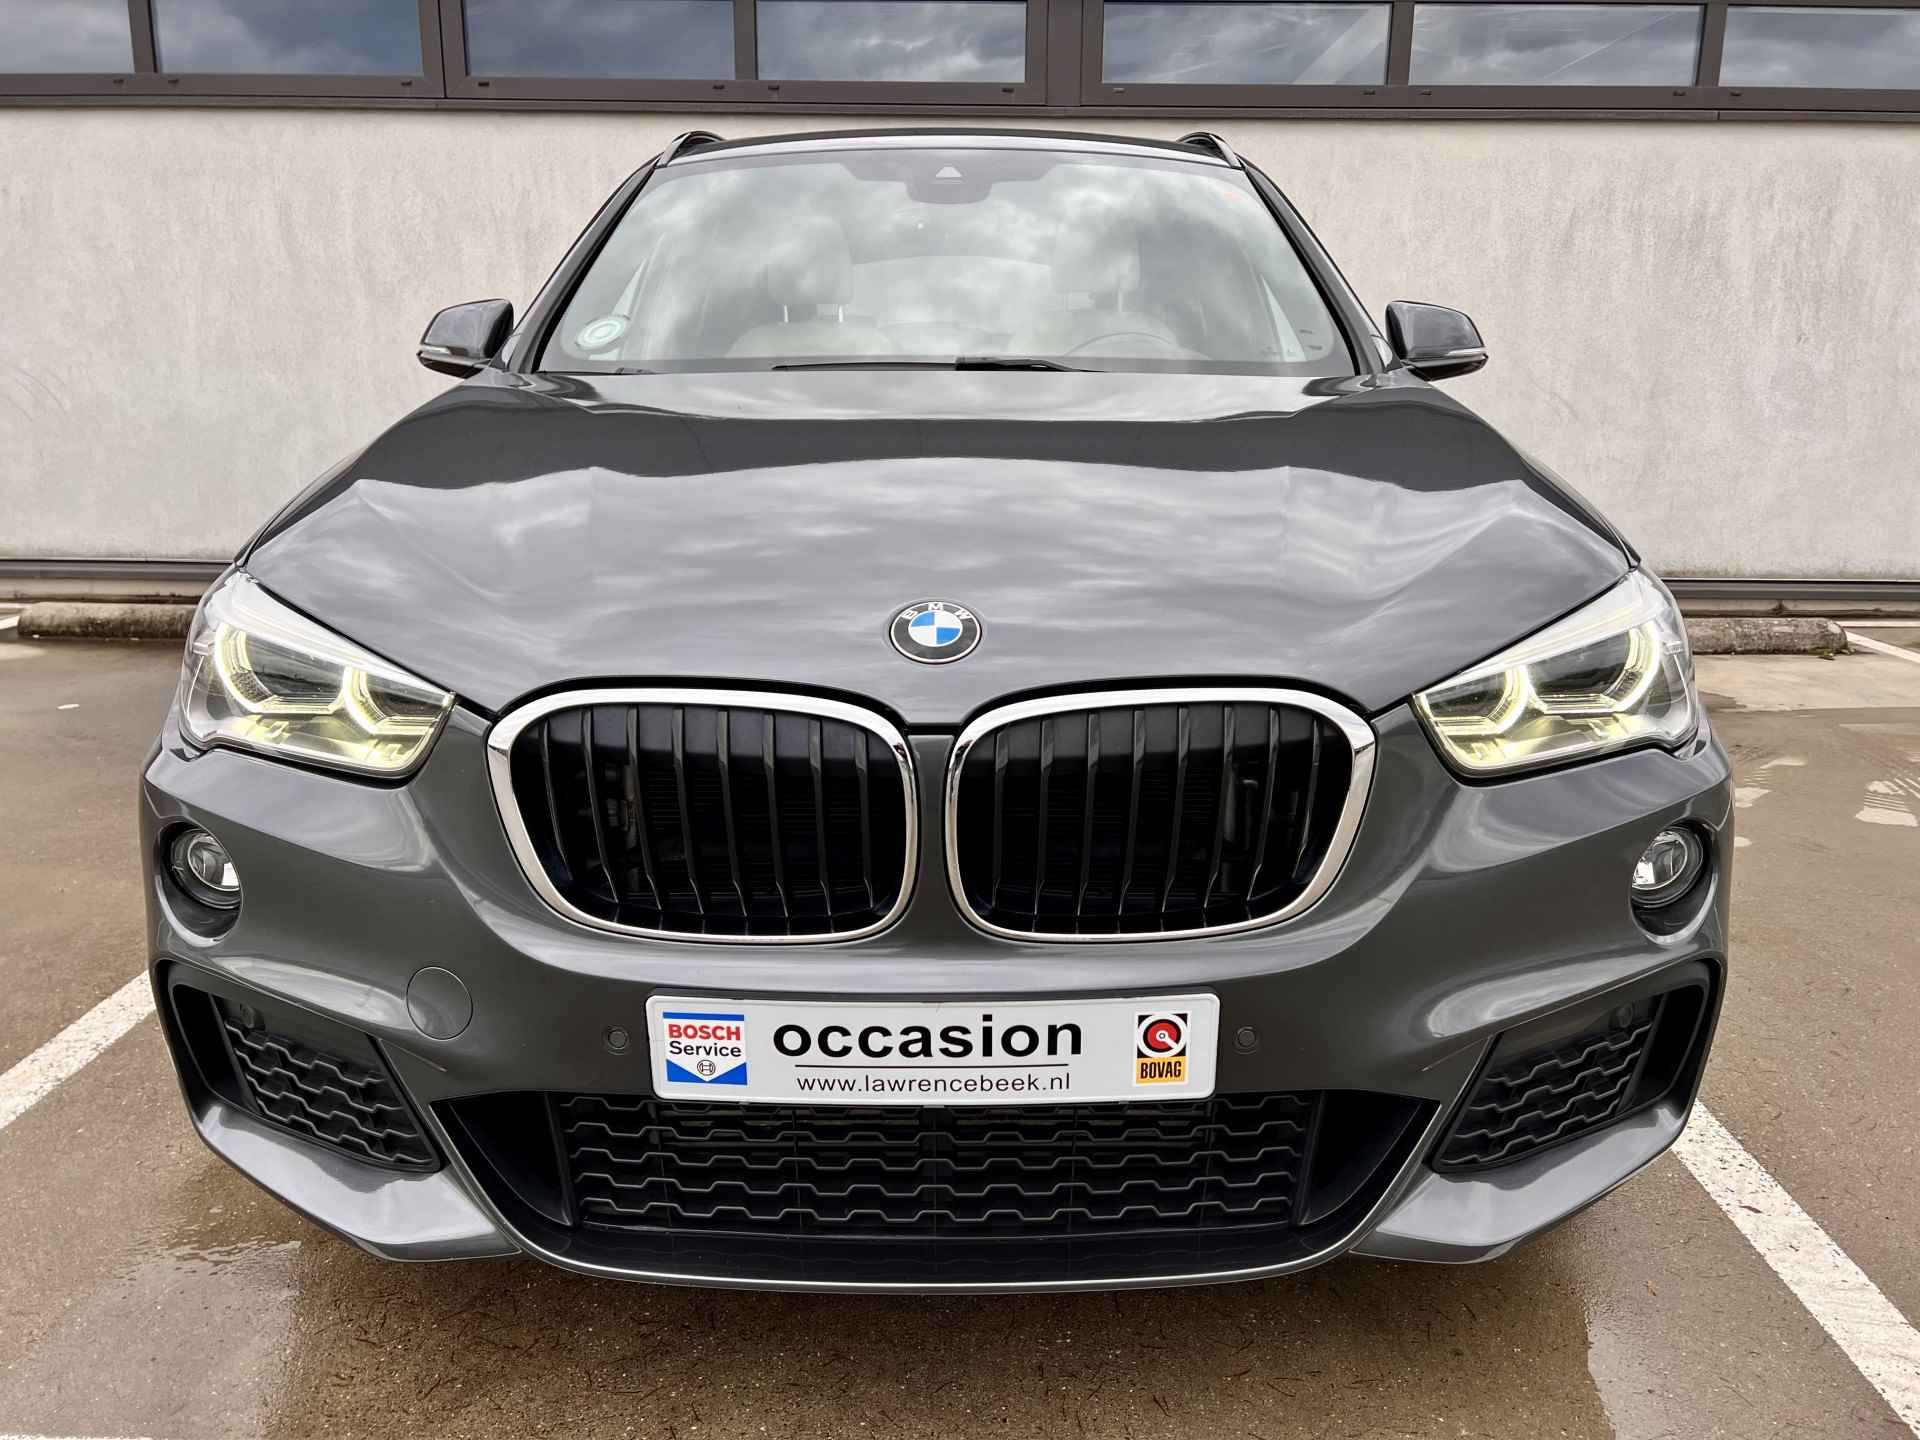 BMW X1 xDrive25i M Sport 231 PK | Leer | Pano |Head Up | Camera | % Bovag Occasion Partner % - 15/48